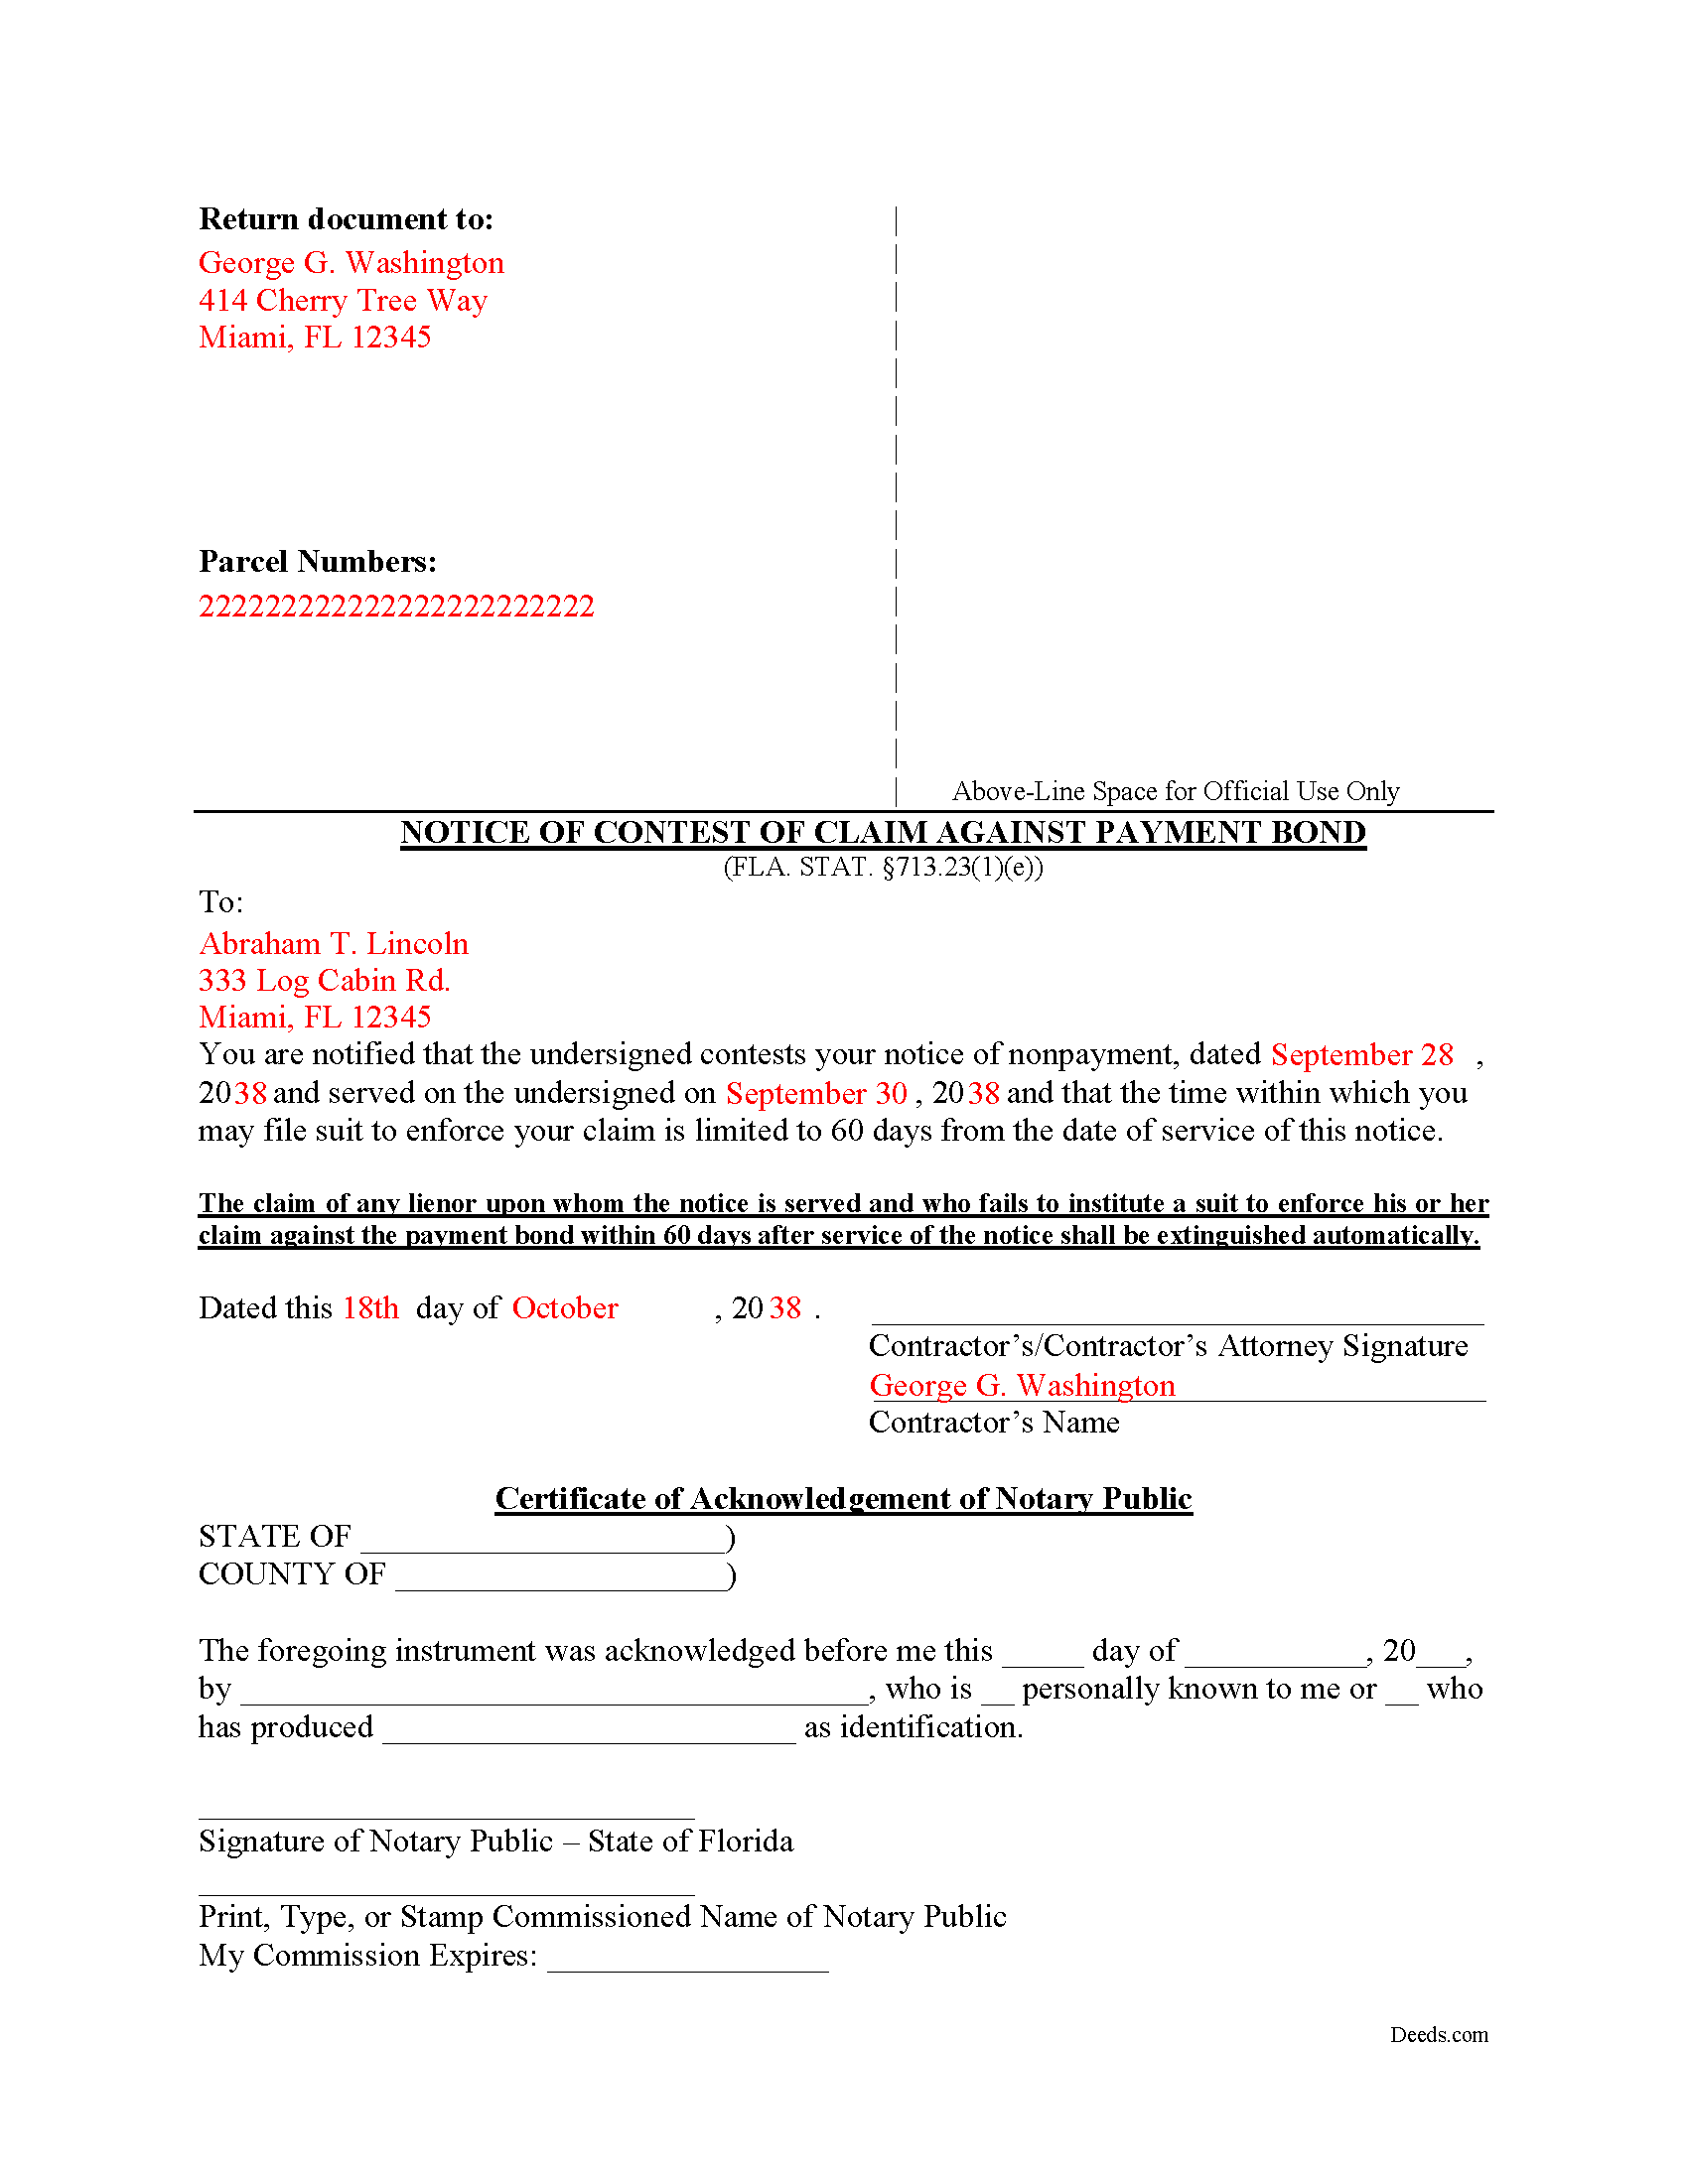 Completed Example of the Notice of Contest of Claim Against Payment Bond Document